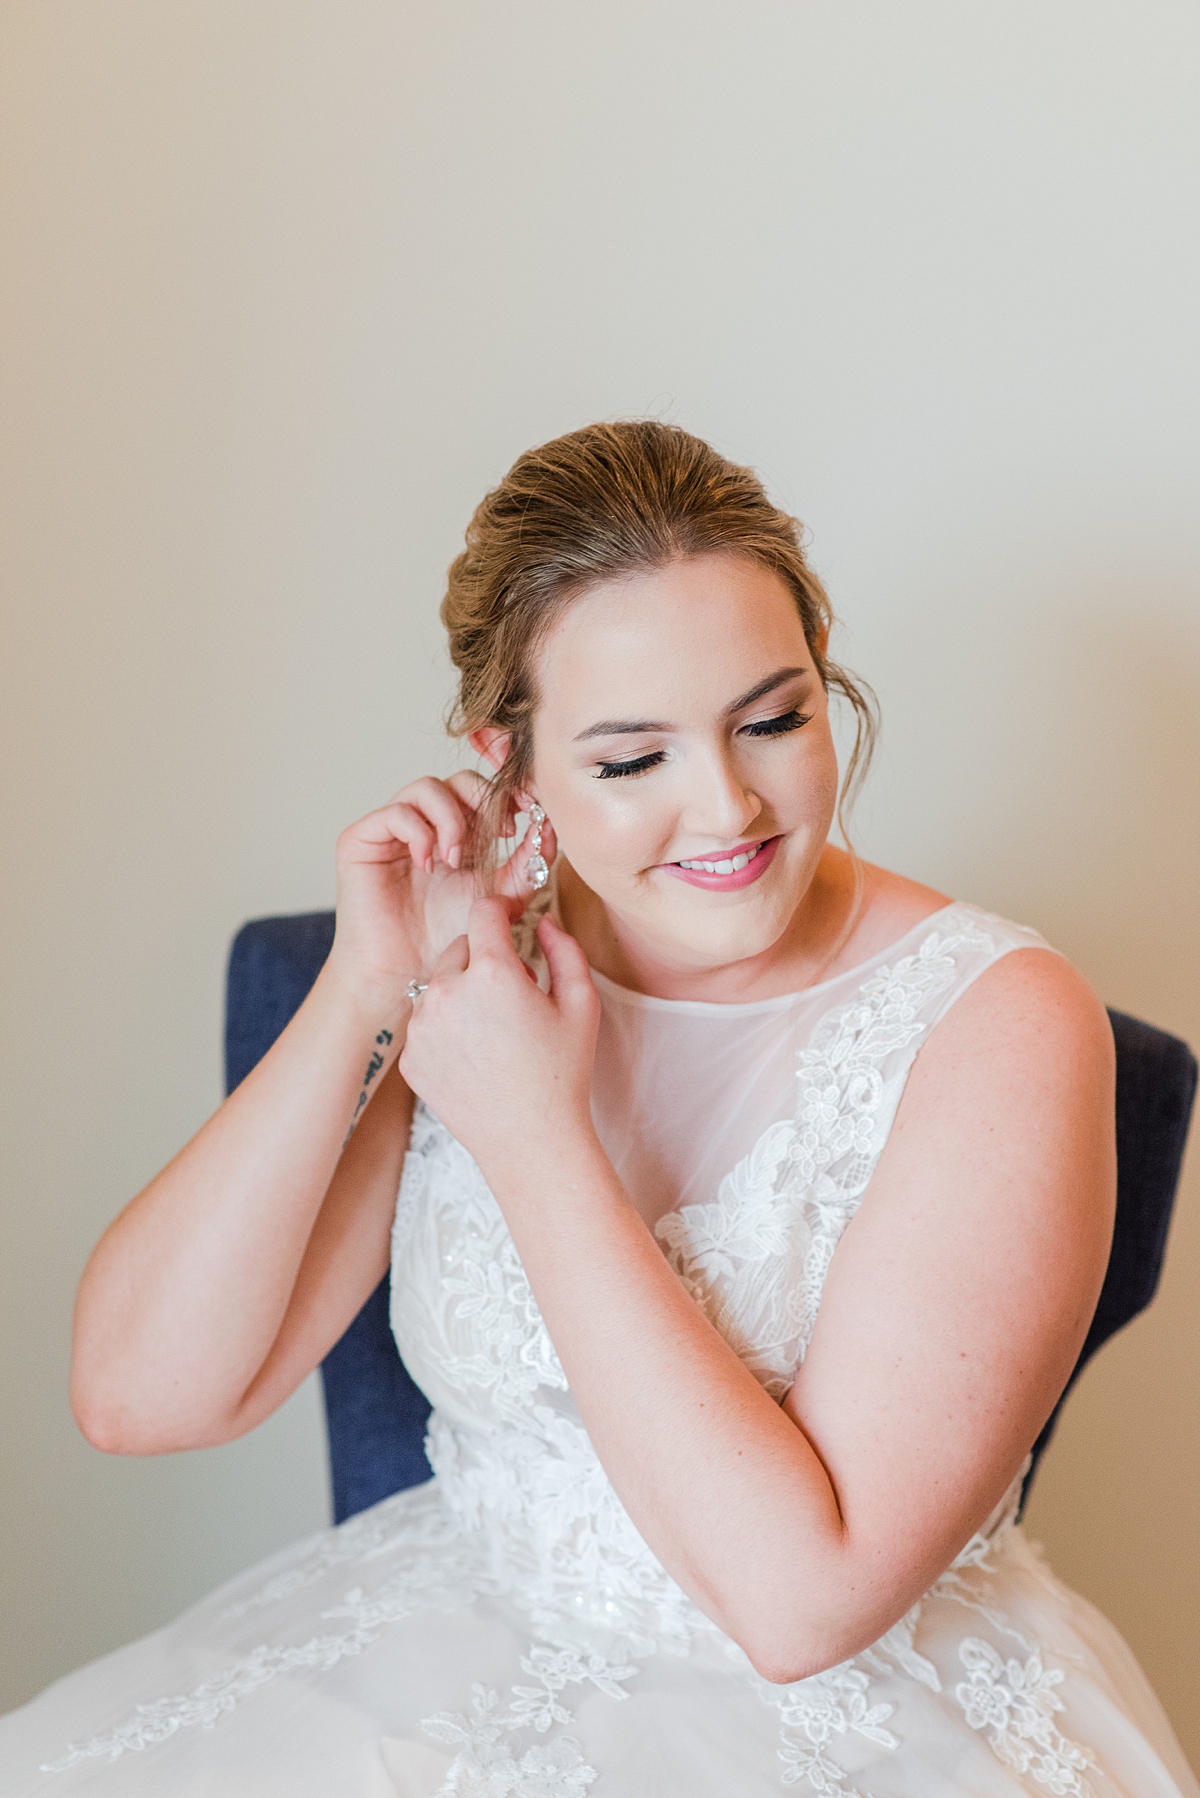 Bridal Portraits at a Timeless Grace Estate Winery Wedding. Wedding Photography by Richmond Wedding Photographer Kailey Brianne Photography.